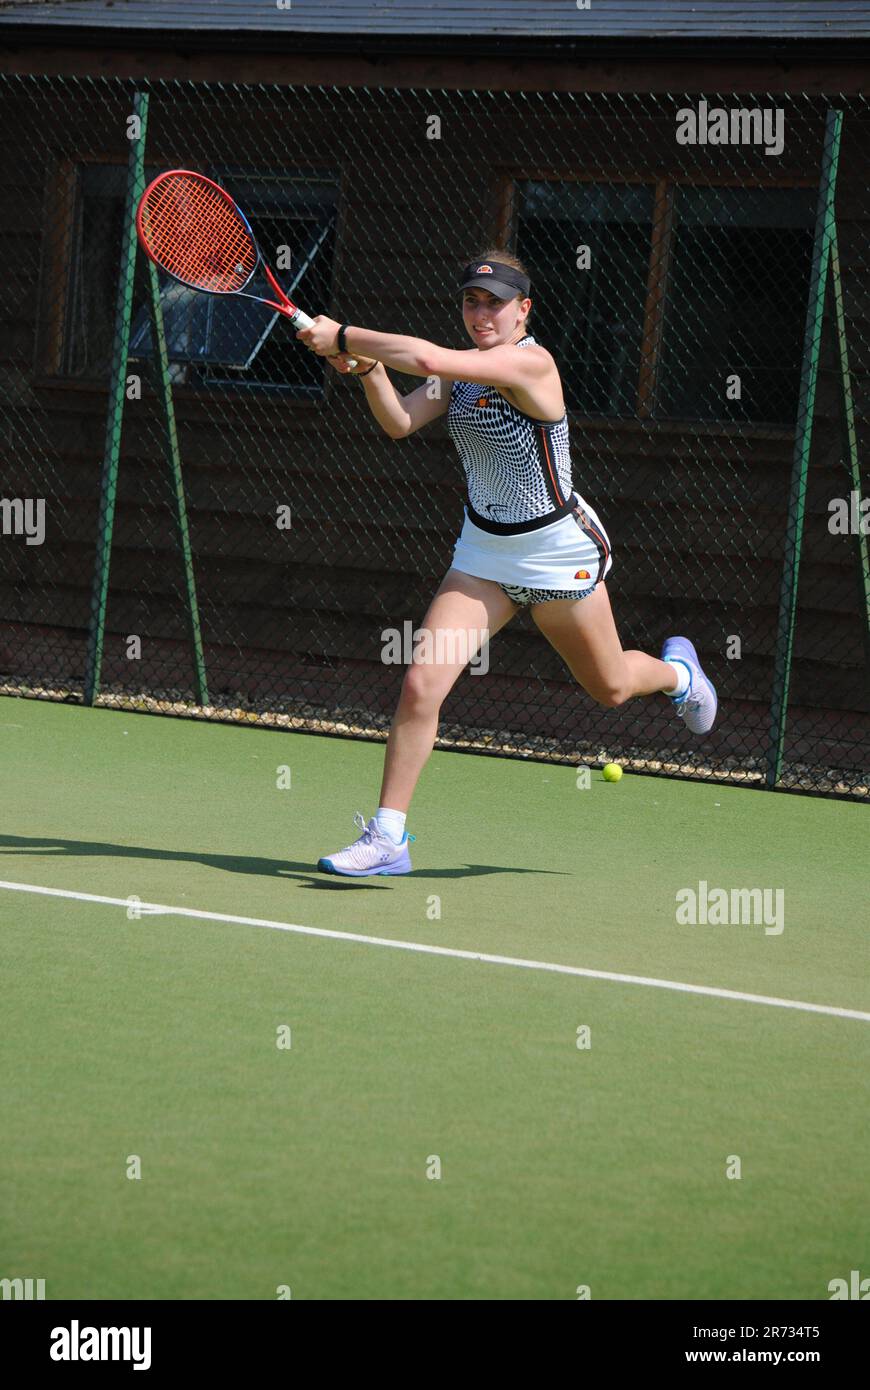 Amelie tennis player backhand Stock Photo